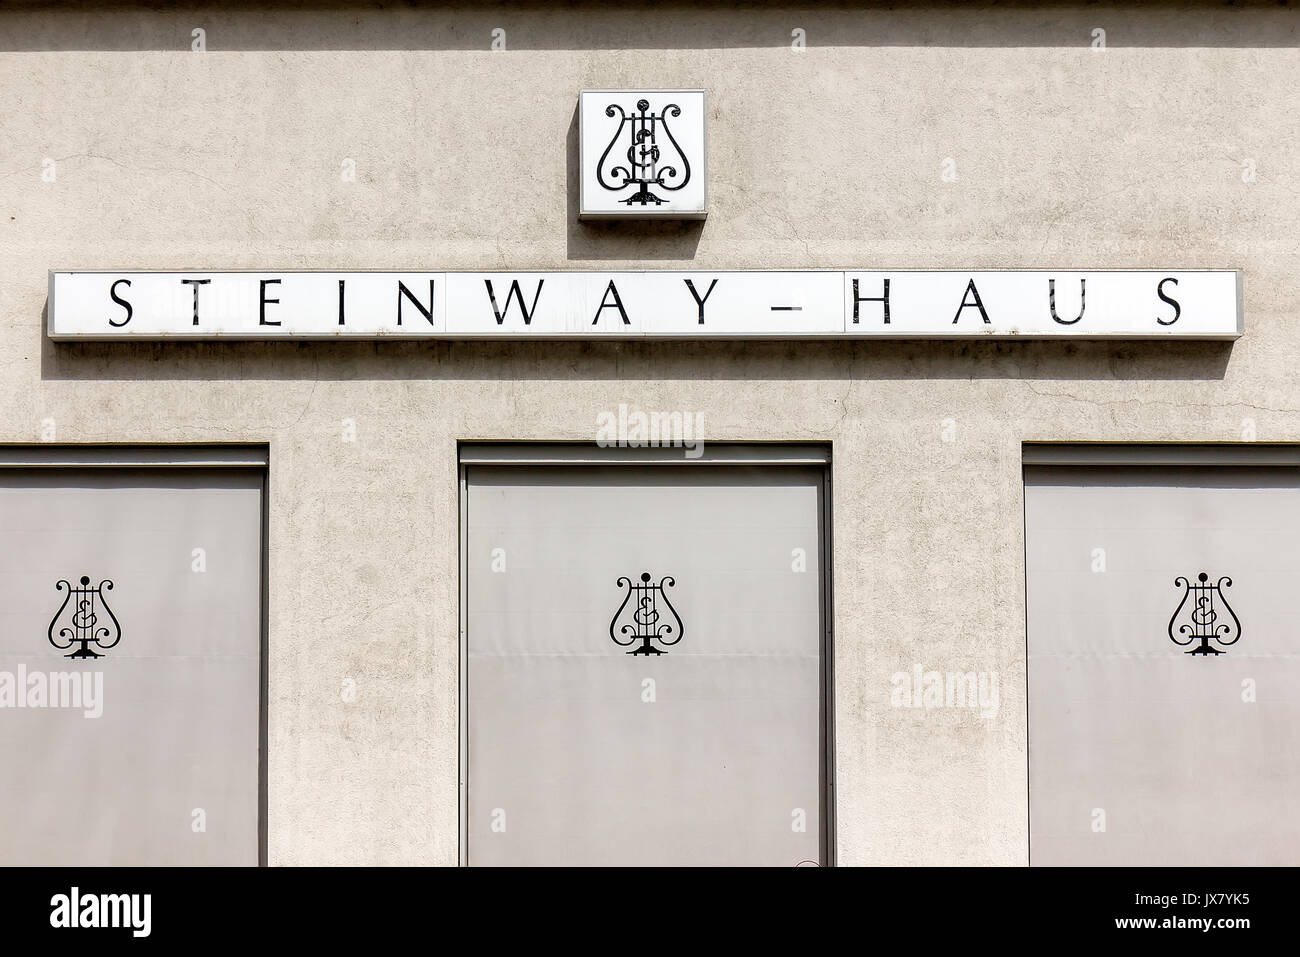 Steinway Hall is the name of buildings housing concert halls, showrooms and sales departments for Steinway & Sons Stock Photo